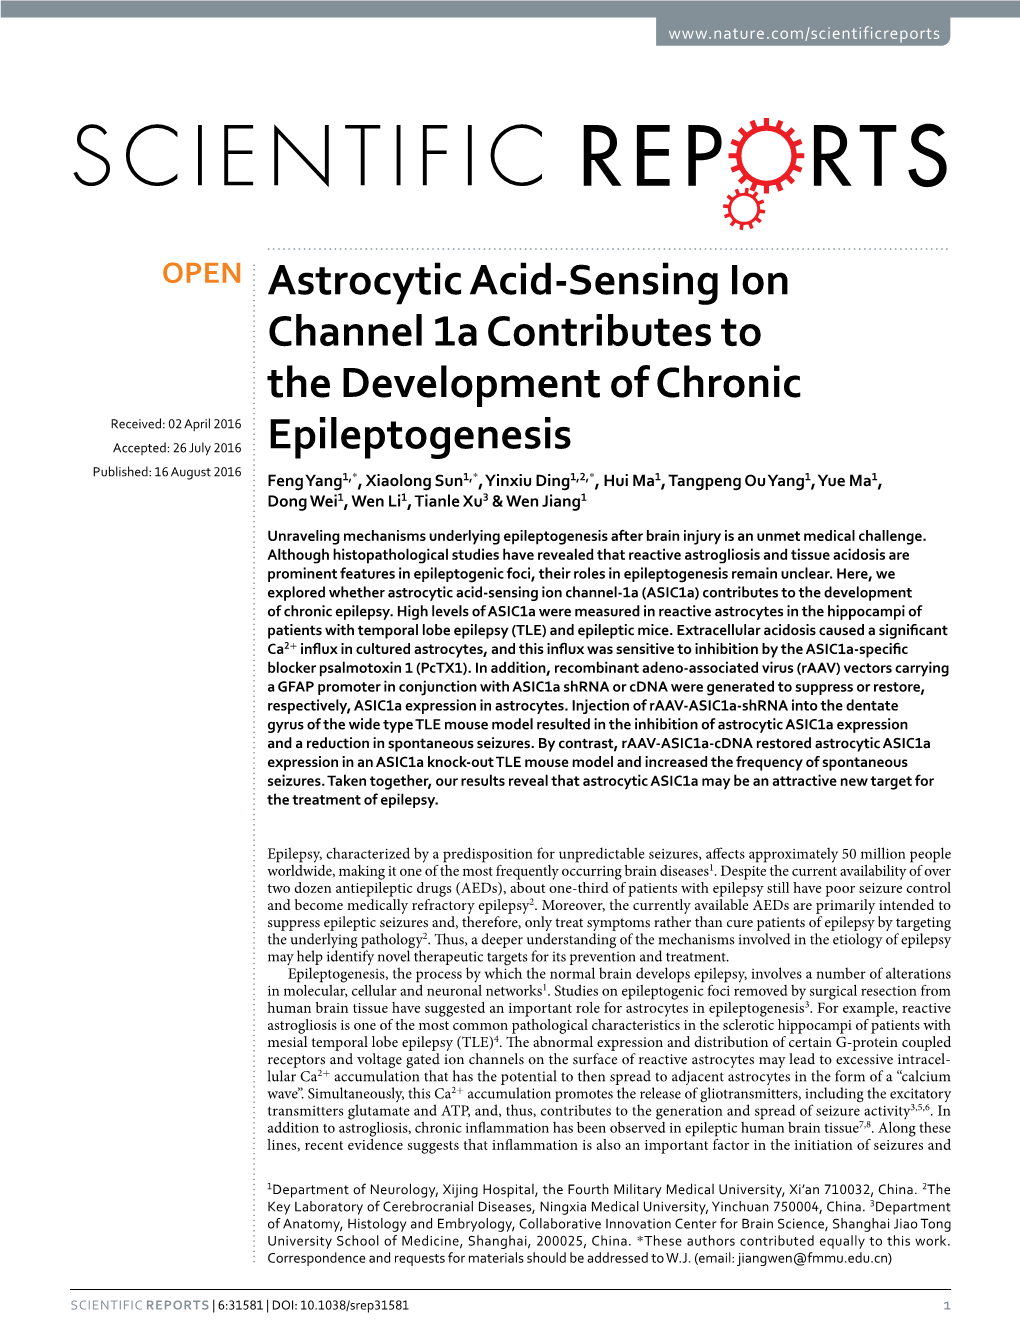 Astrocytic Acid-Sensing Ion Channel 1A Contributes to the Development